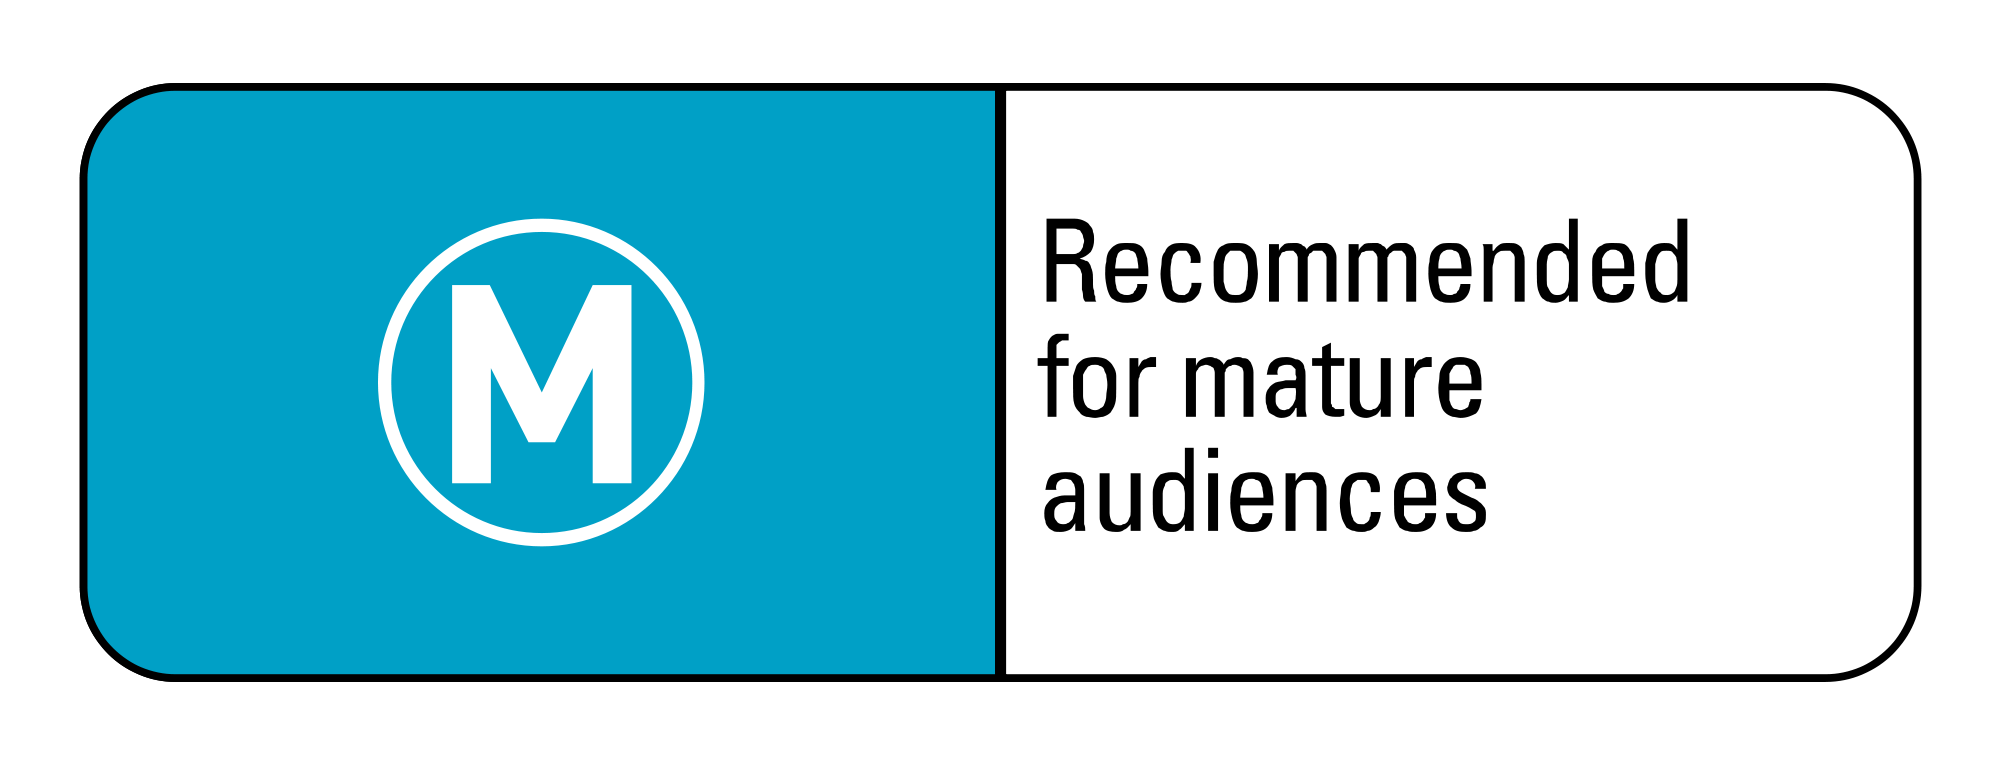 Unleash Your Wild Side: Exploring Mature Audiences Movies With The Wise Eyes Of The NYT